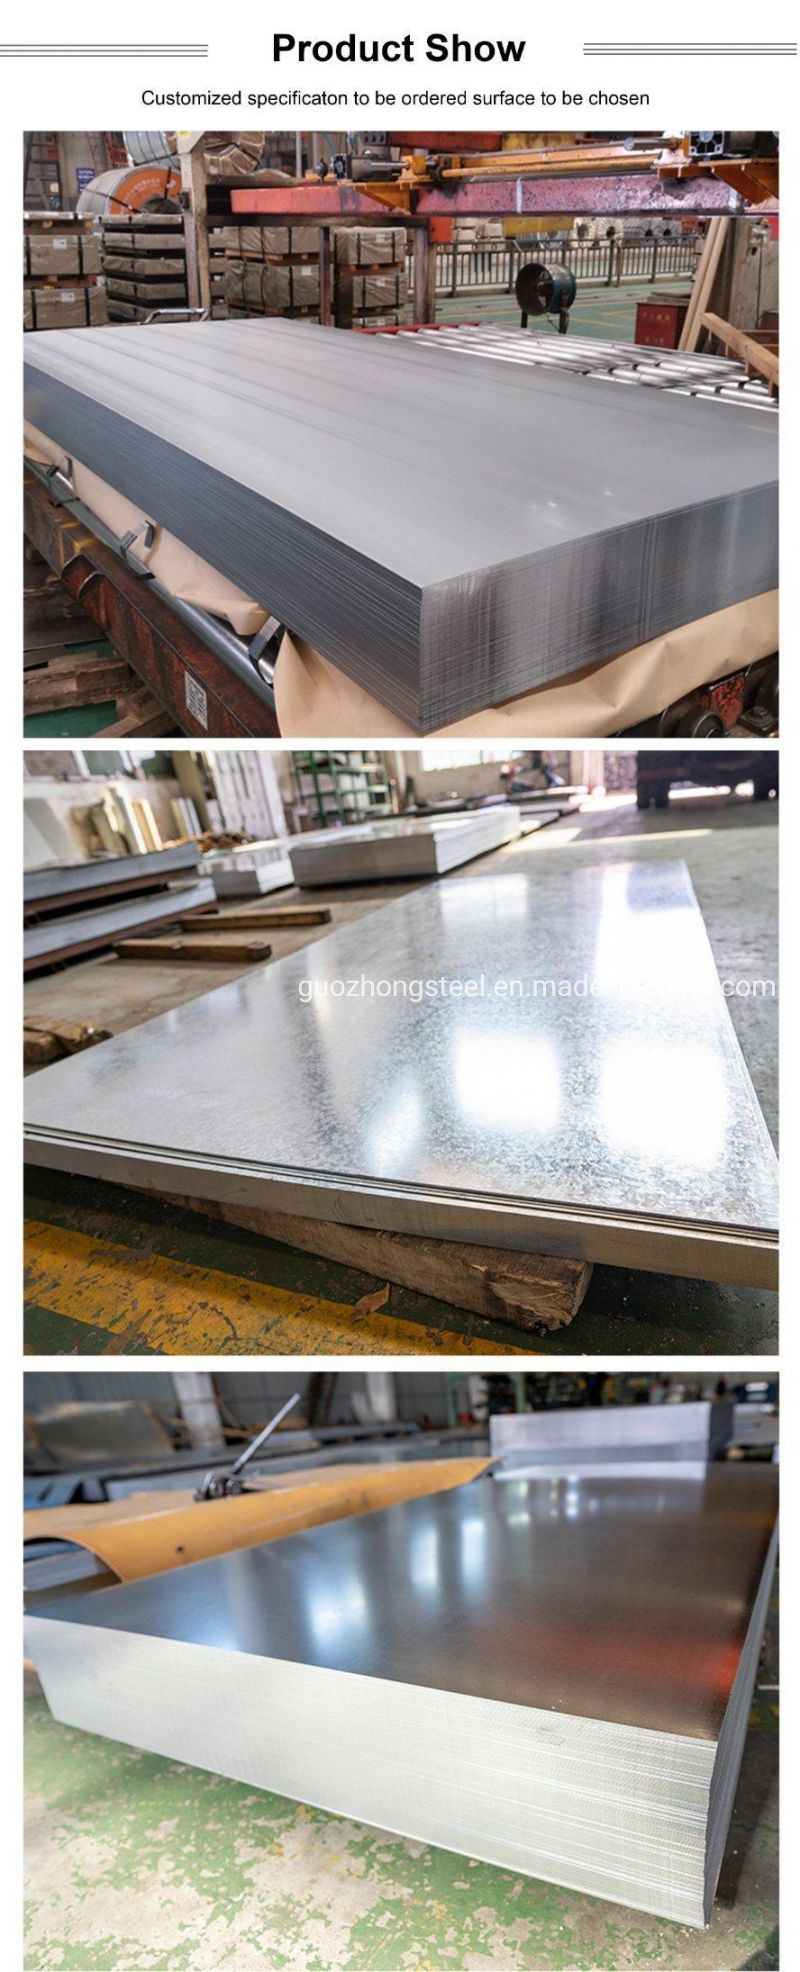 Guozhong Low Carbon Steel Sheet/Plate En10210 S355jr Hot Rolled Thickness 5.5mm 6.5mm